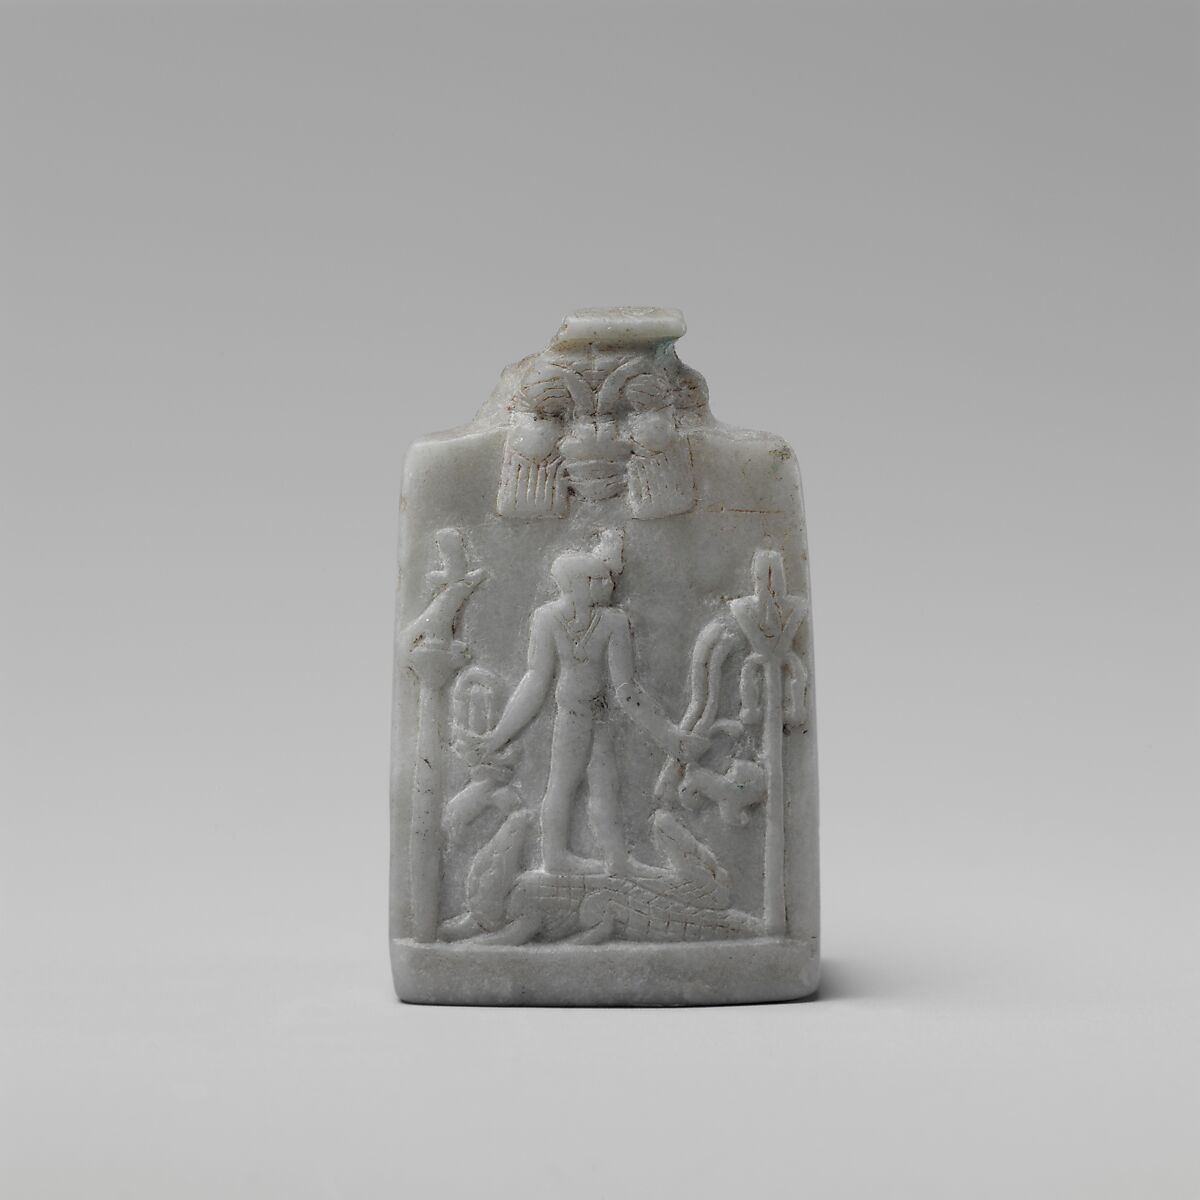 Miniature Cippus (magical stela) with Horus in profile wearing gazelle head on the forehead, Anhydrite 